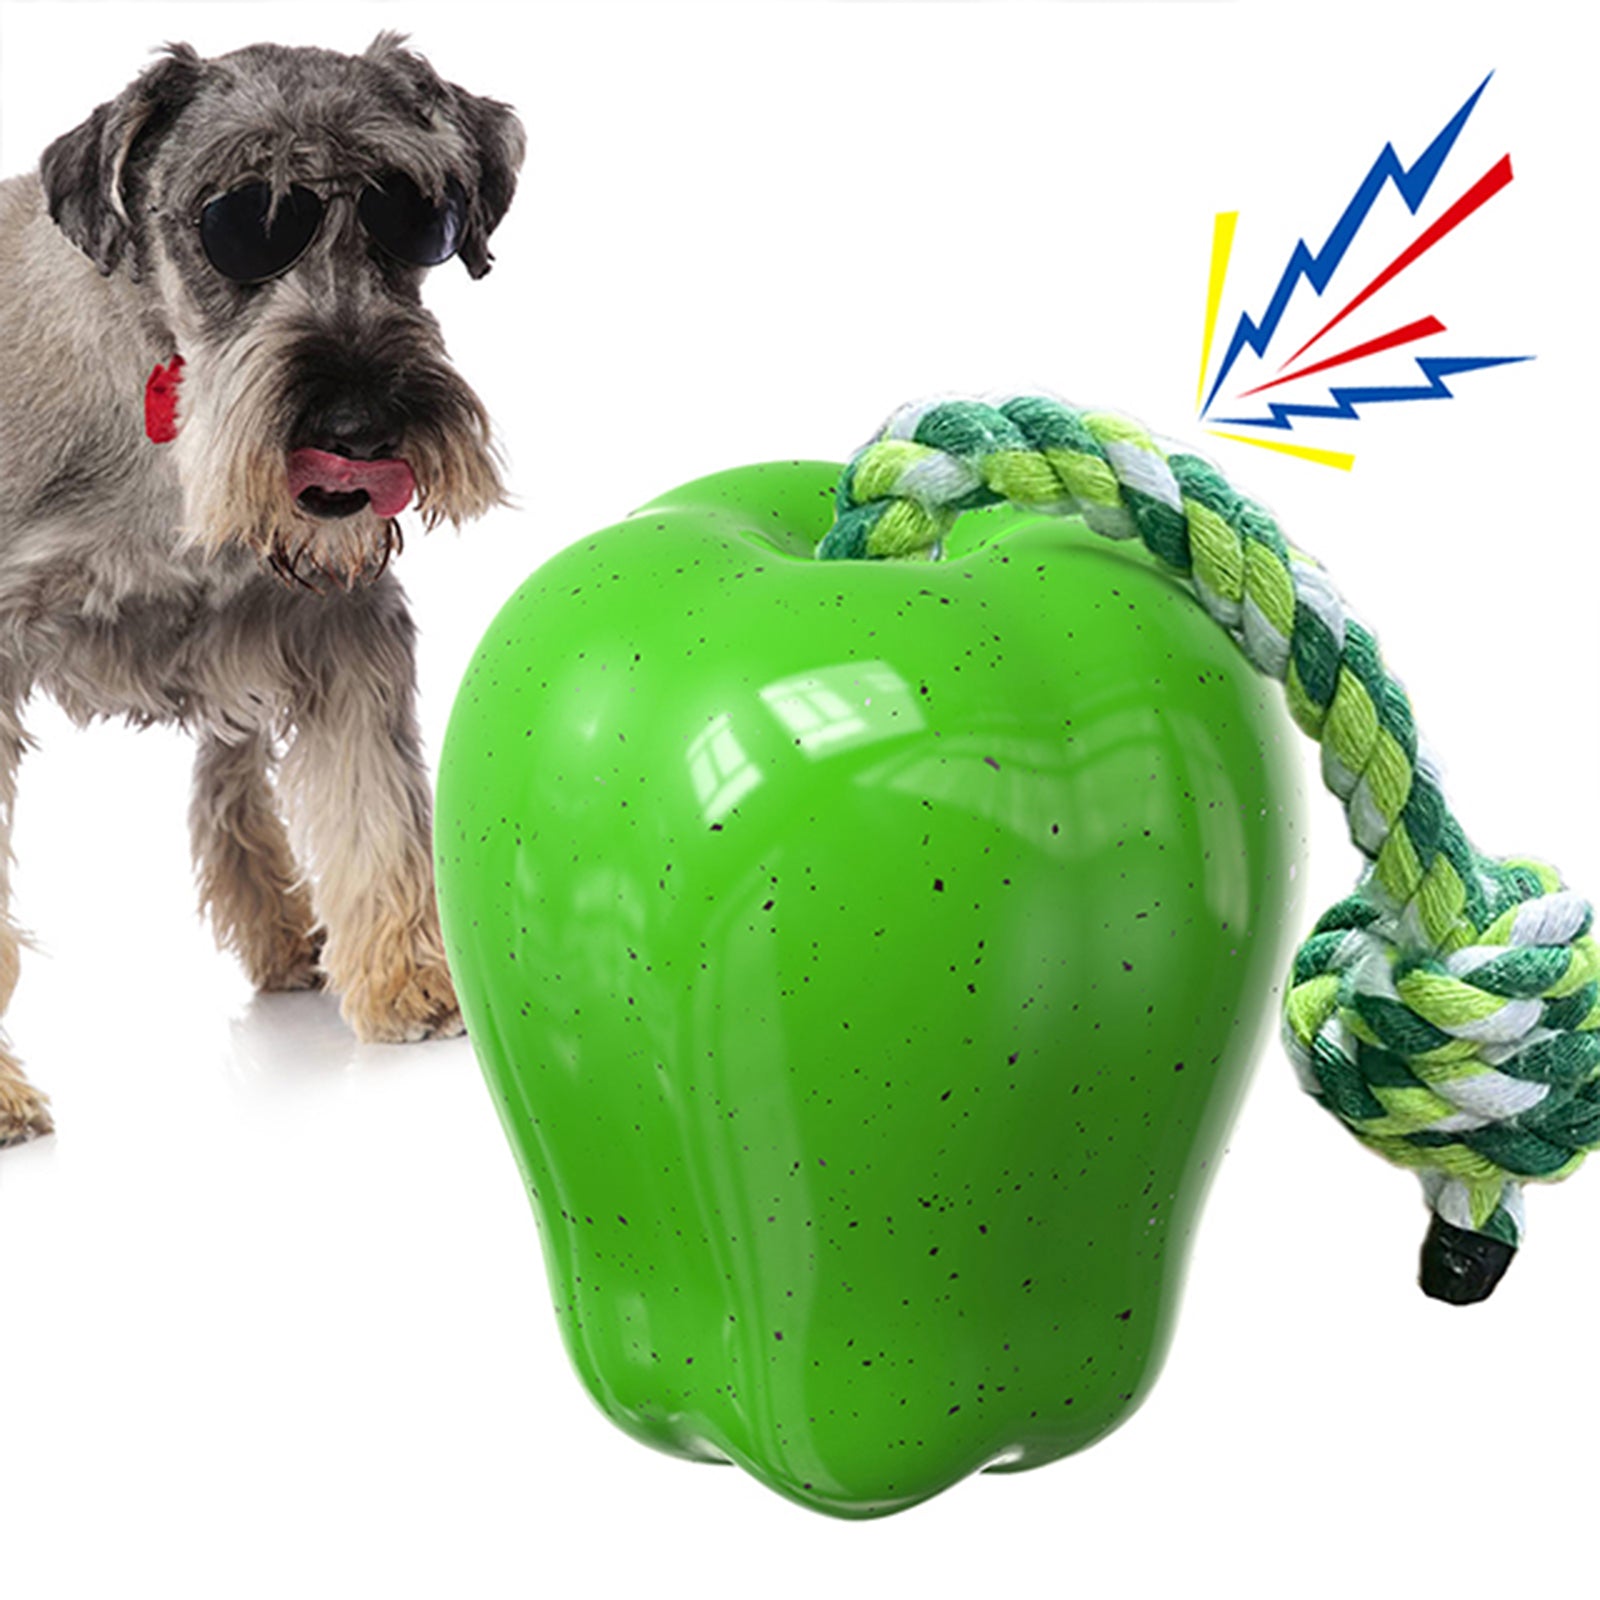 KADTC Dog Chew Toys For Aggressive Chewers Indestructible Tough Durable Squeaky Interactive Puppy Toy Teeth Squeaky Apple Pet Teeth Grinding Toy